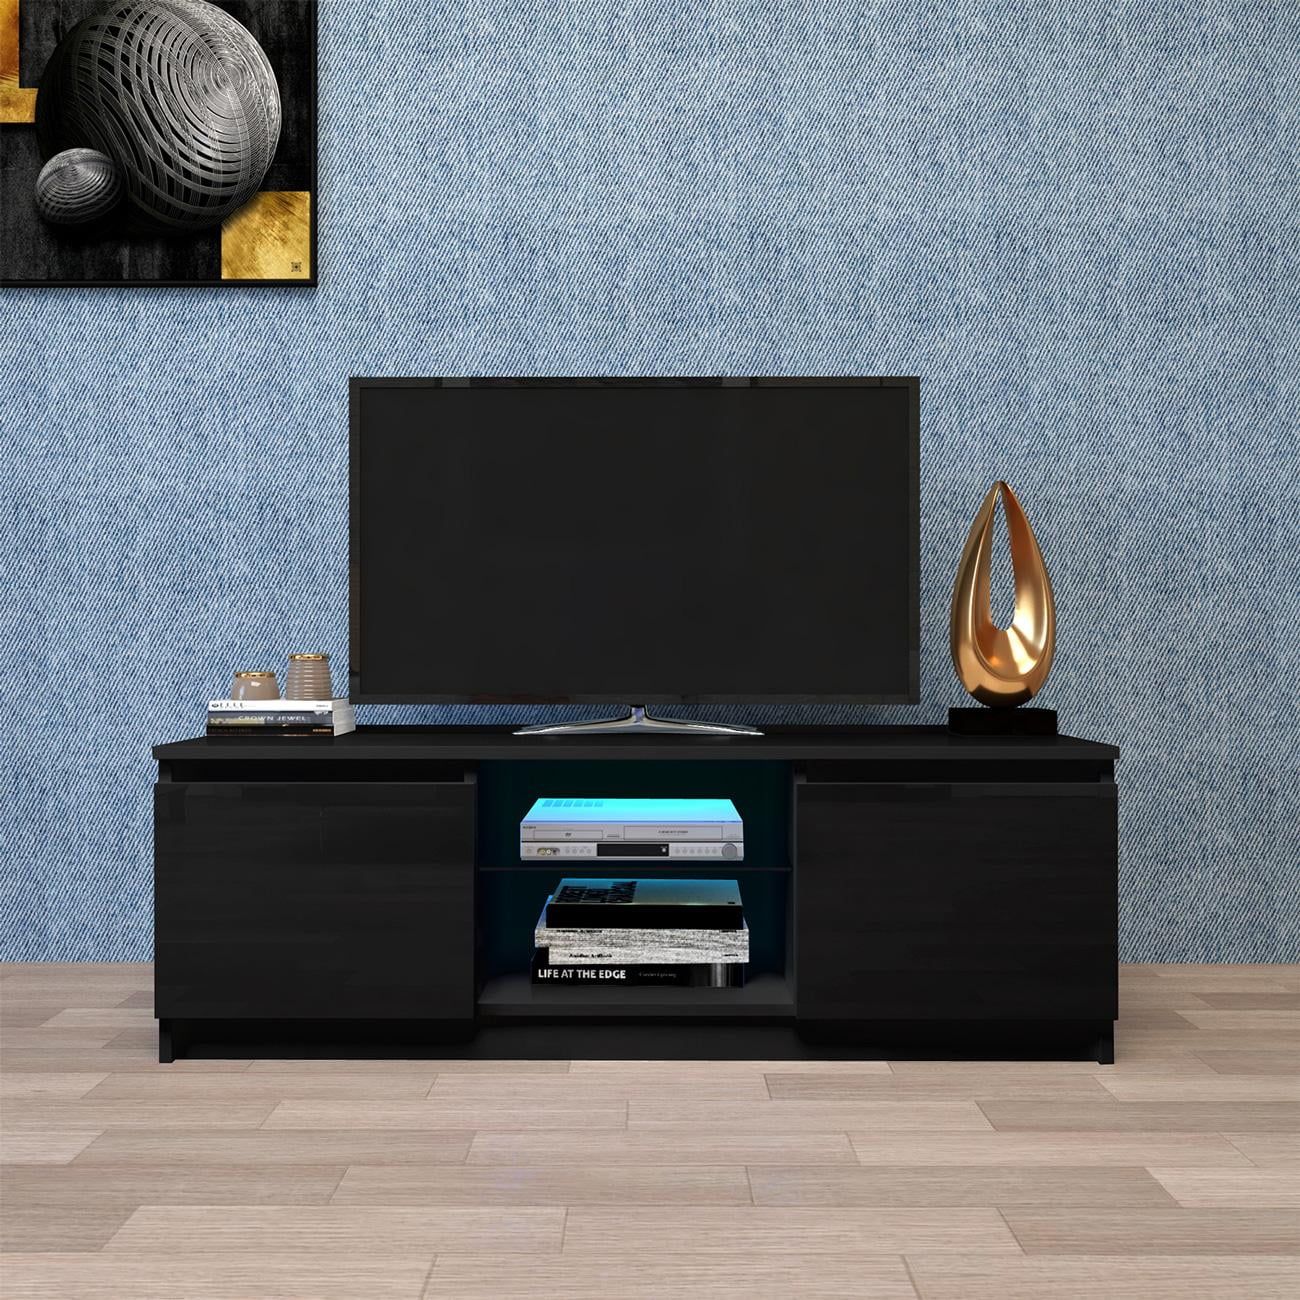 Tv Stand With Storage Drawers Shelves Led Rgb Lights, For Flat Tv 40 55 In Tv Stands With Lights (View 13 of 20)